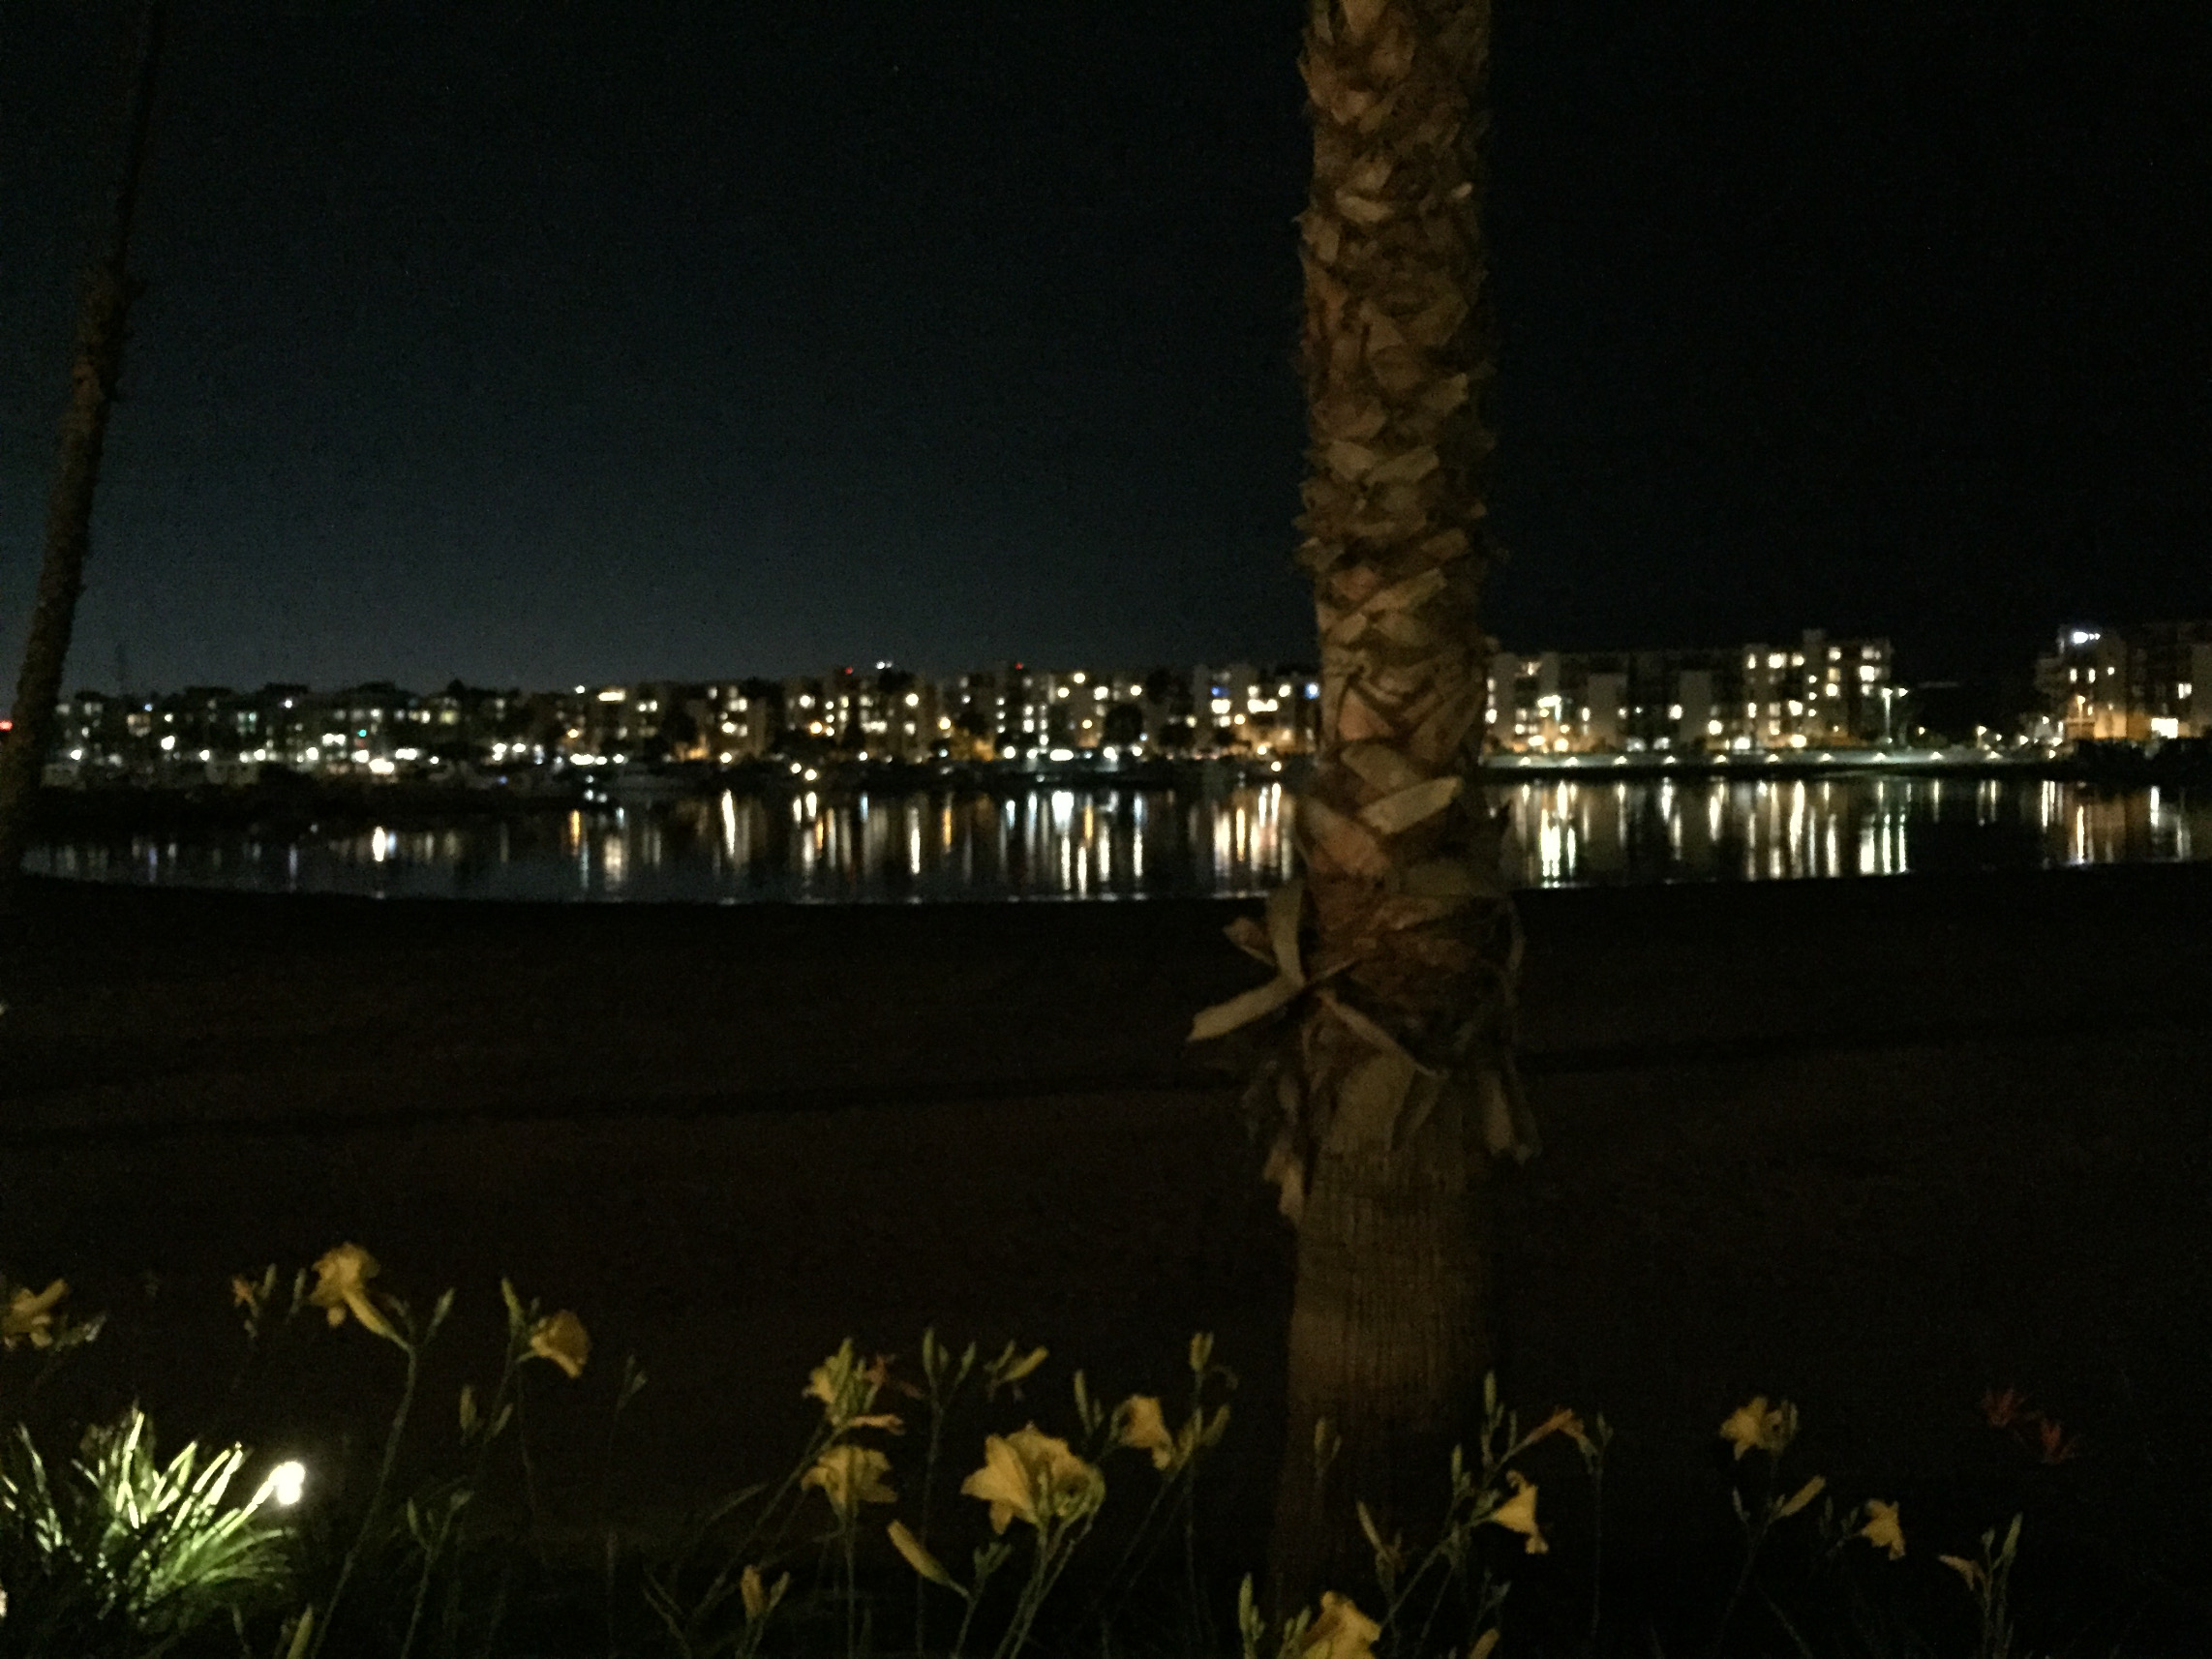 Marina del Rey at night, lights, flowers, palm trees, California, Those Someday Goals